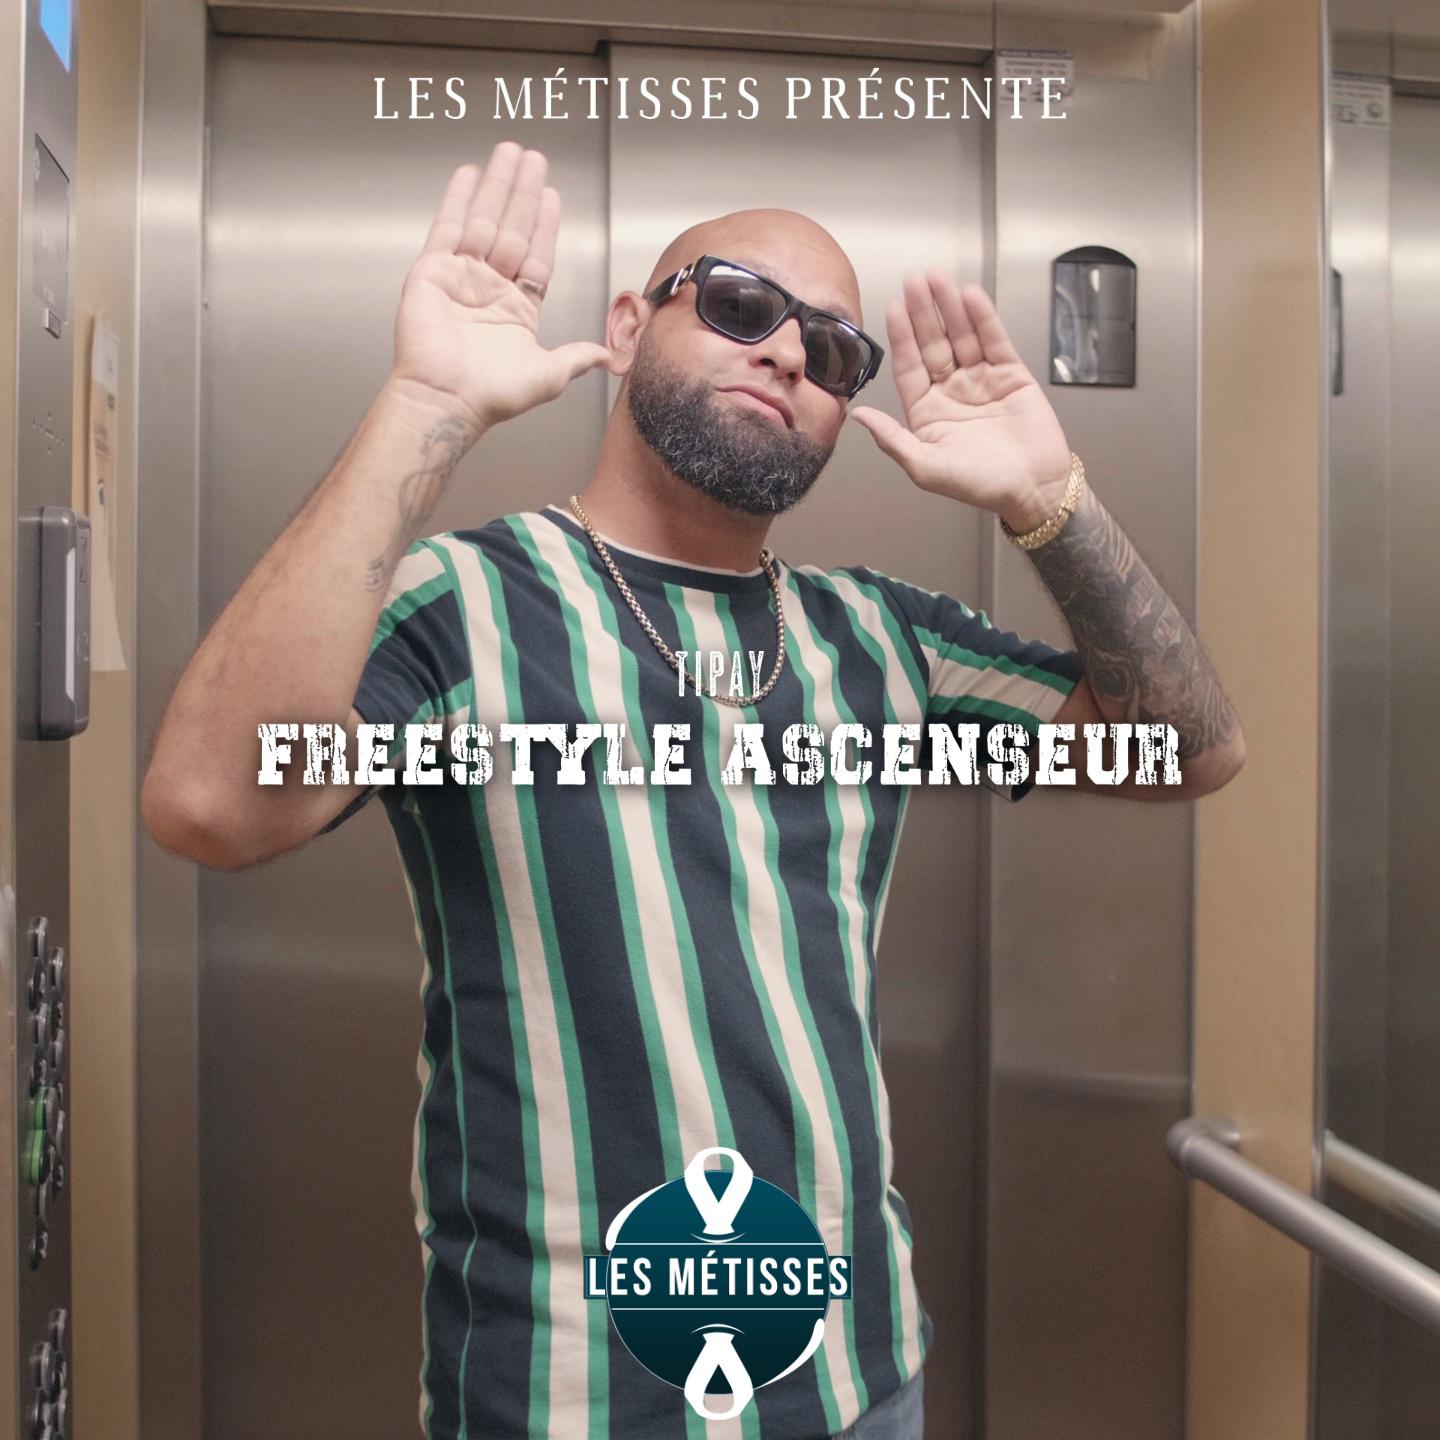 Tipay - Freestyle ascenseur